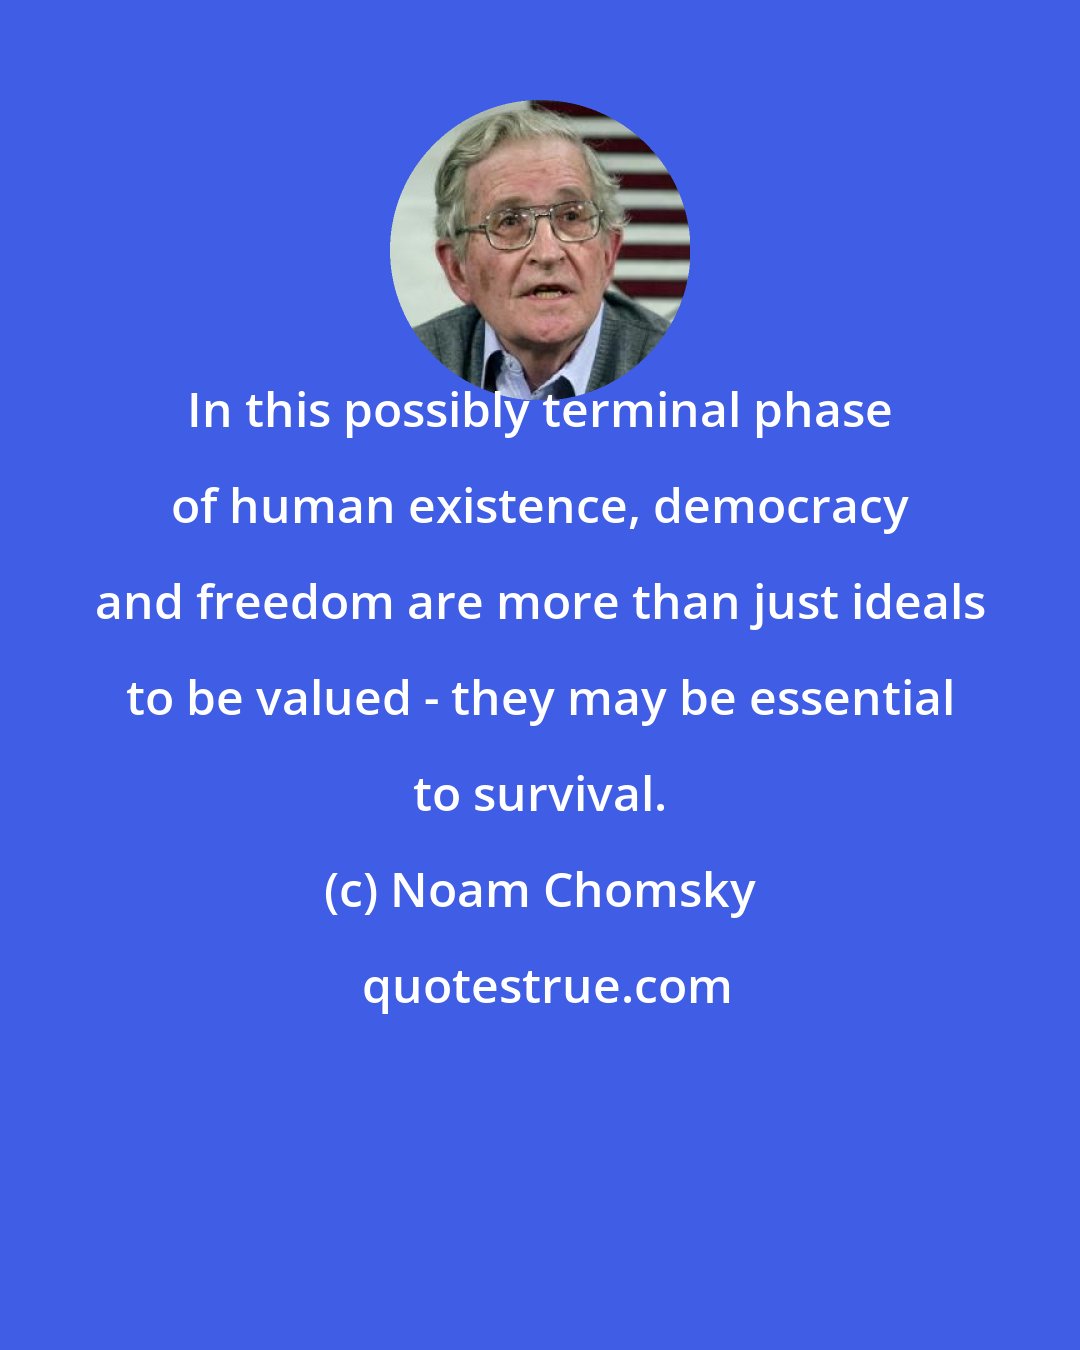 Noam Chomsky: In this possibly terminal phase of human existence, democracy and freedom are more than just ideals to be valued - they may be essential to survival.